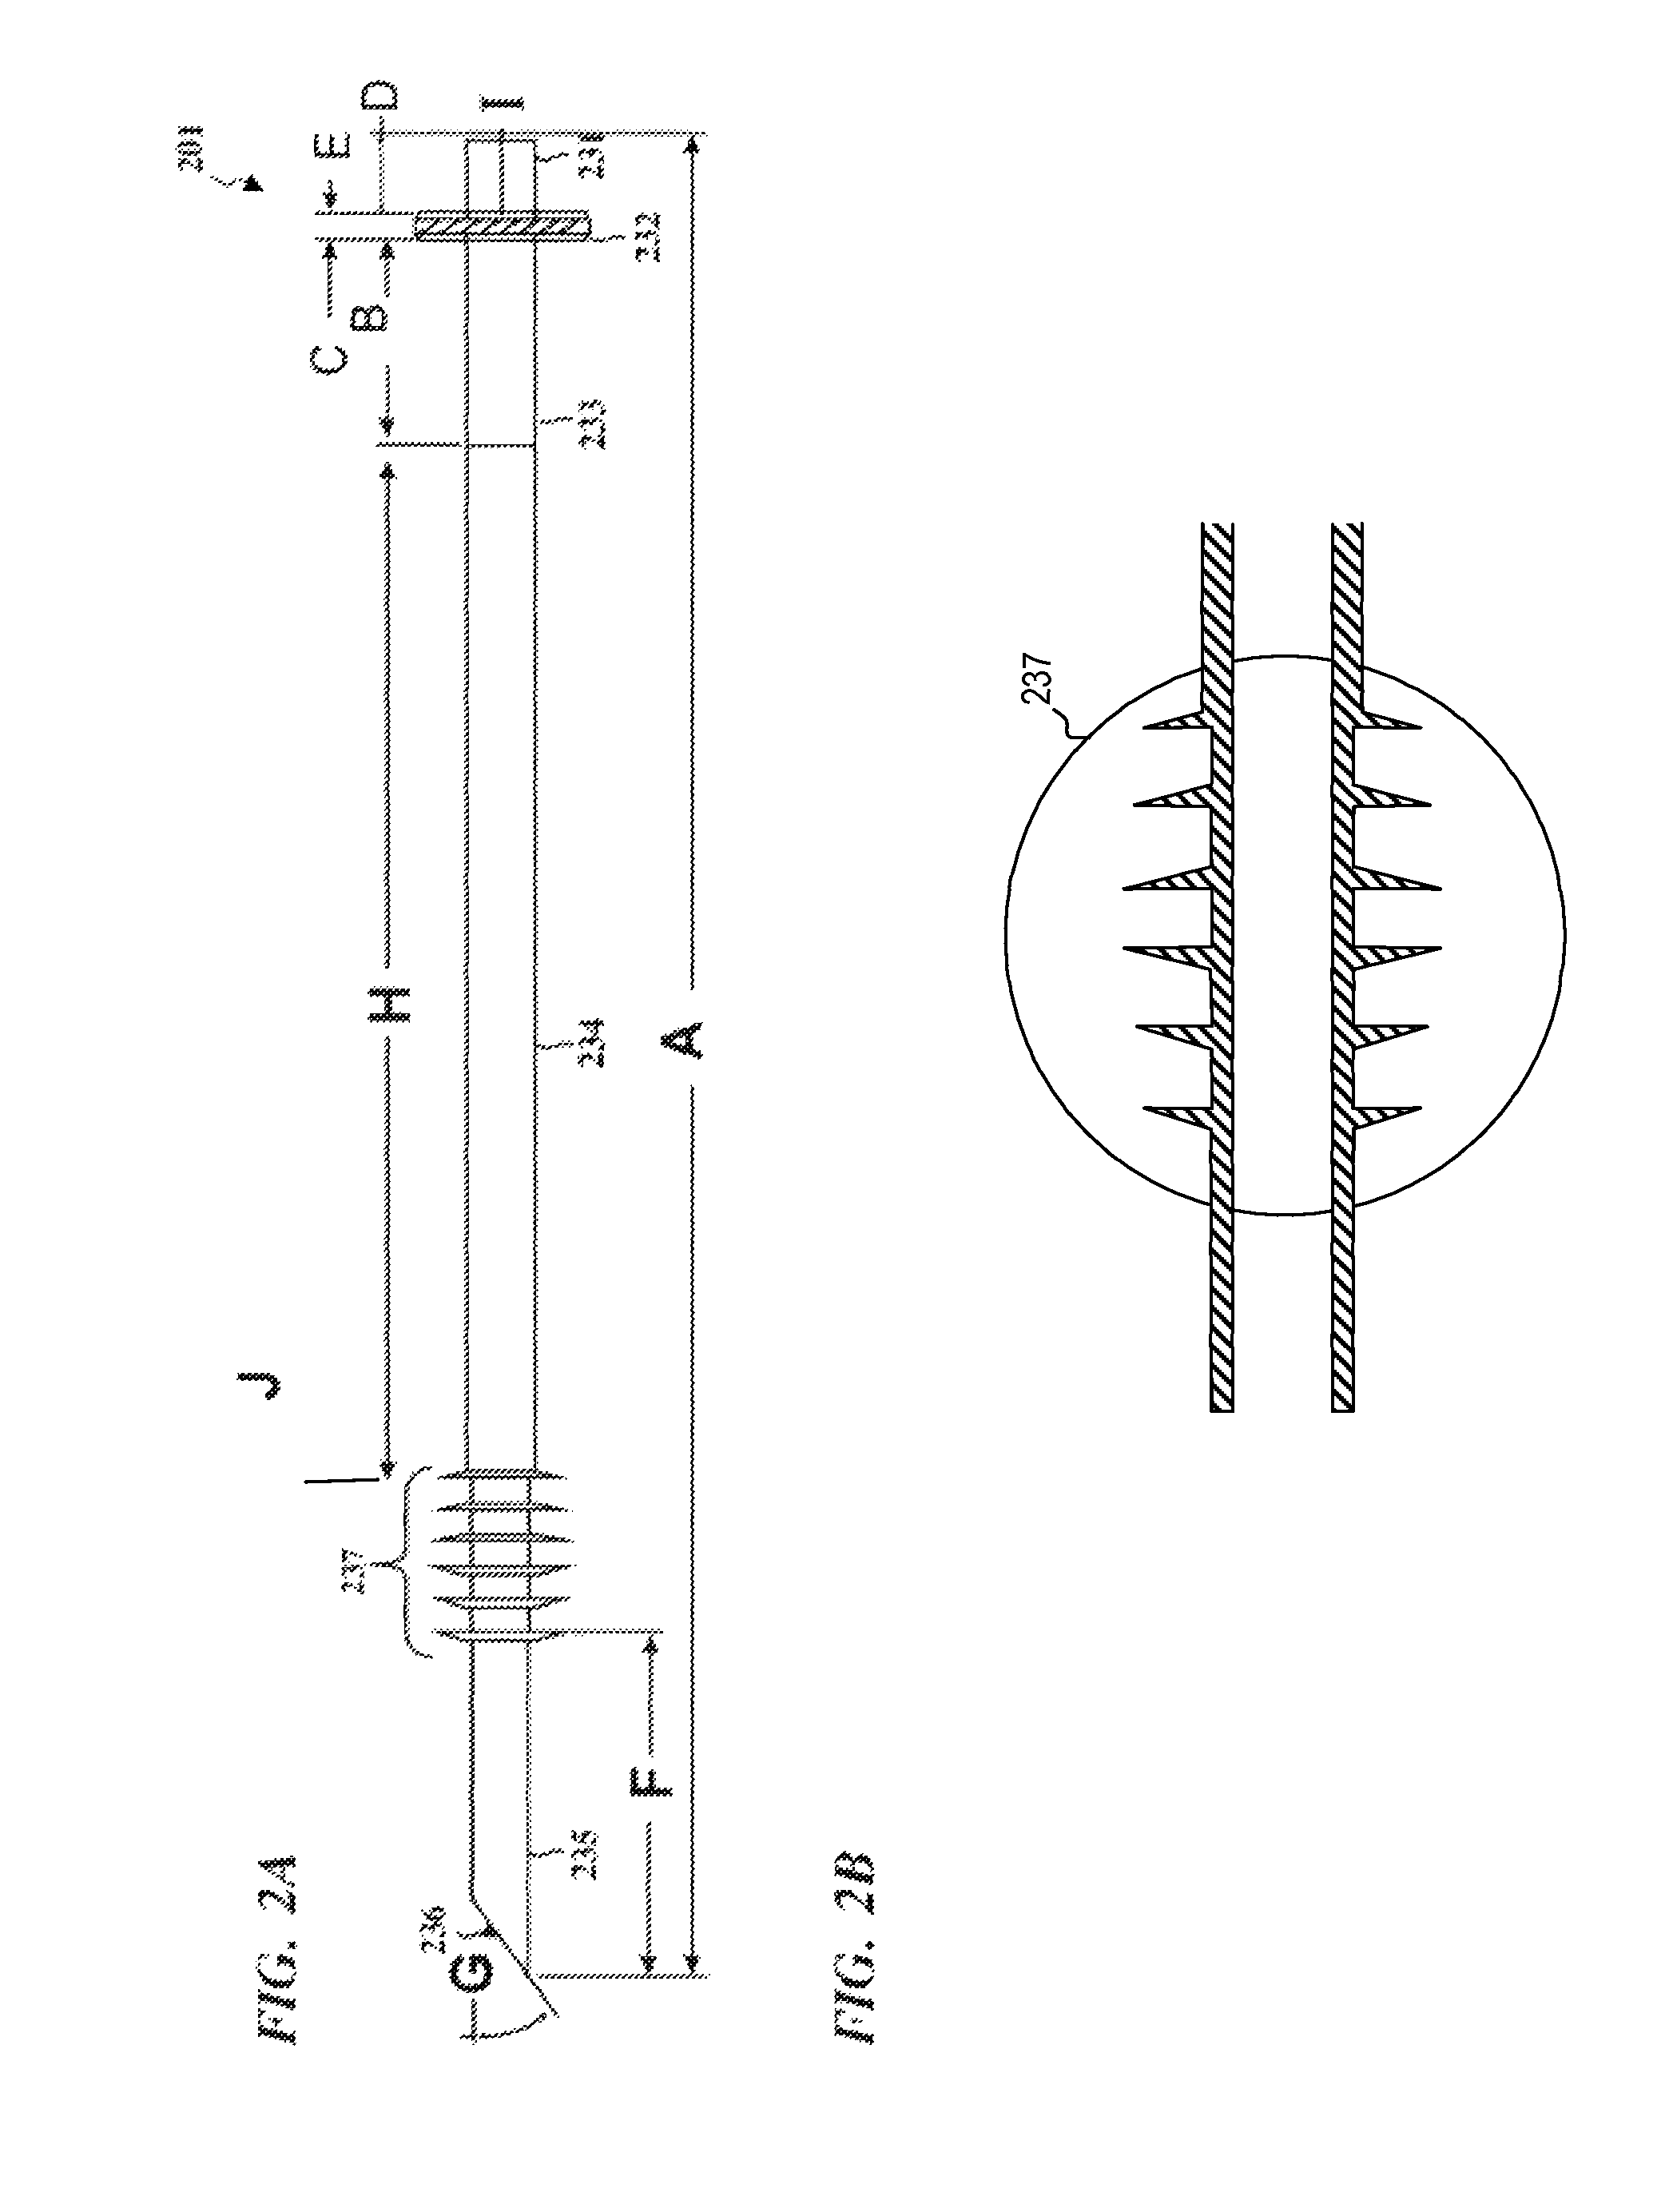 Apparatus and method for intubating humans and non-human animals